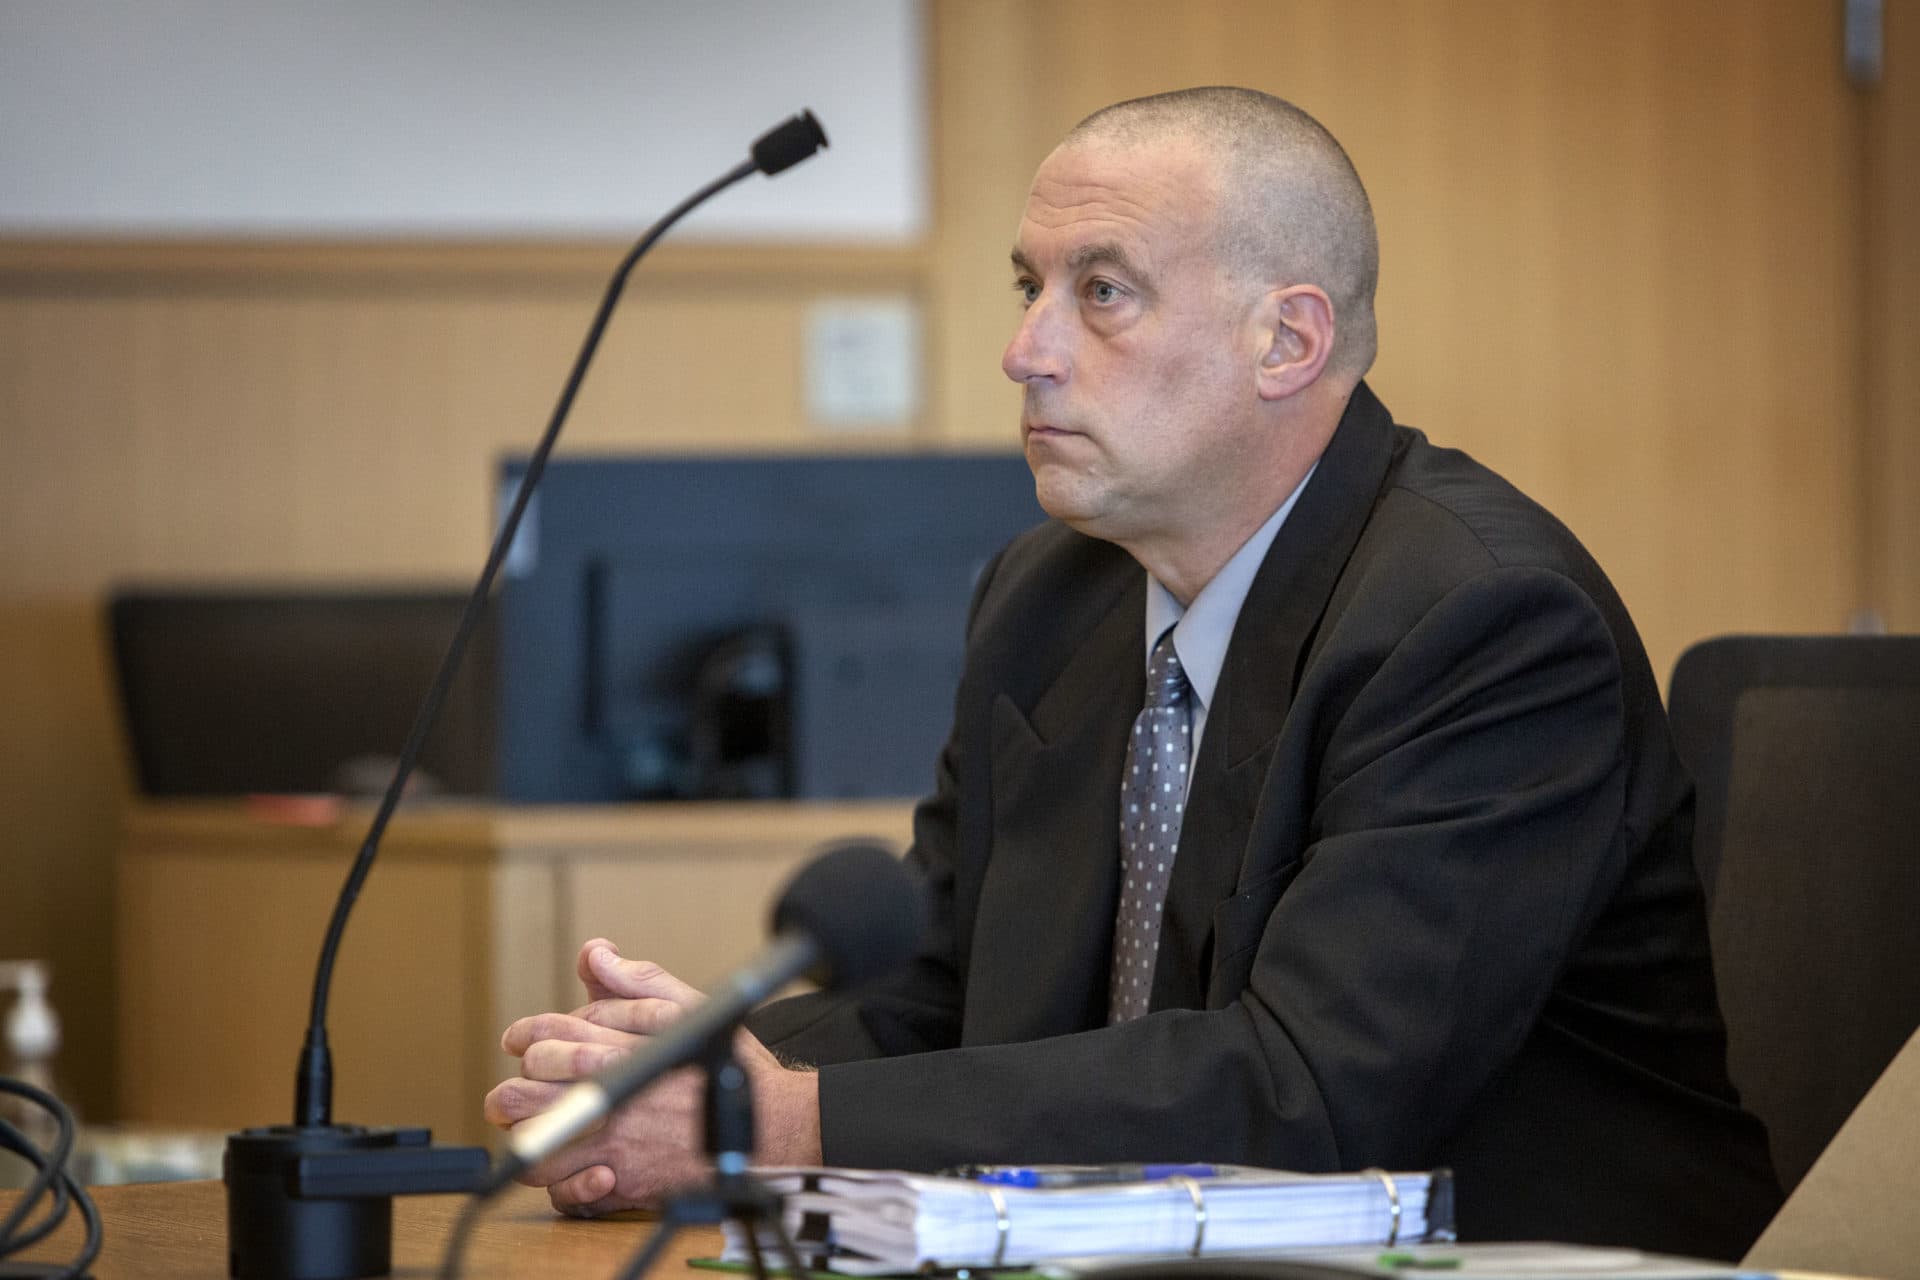 Natick police Officer James Quilty, at a hearing at the Lowell Justice Center in August 2022. (Robin Lubbock/WBUR)